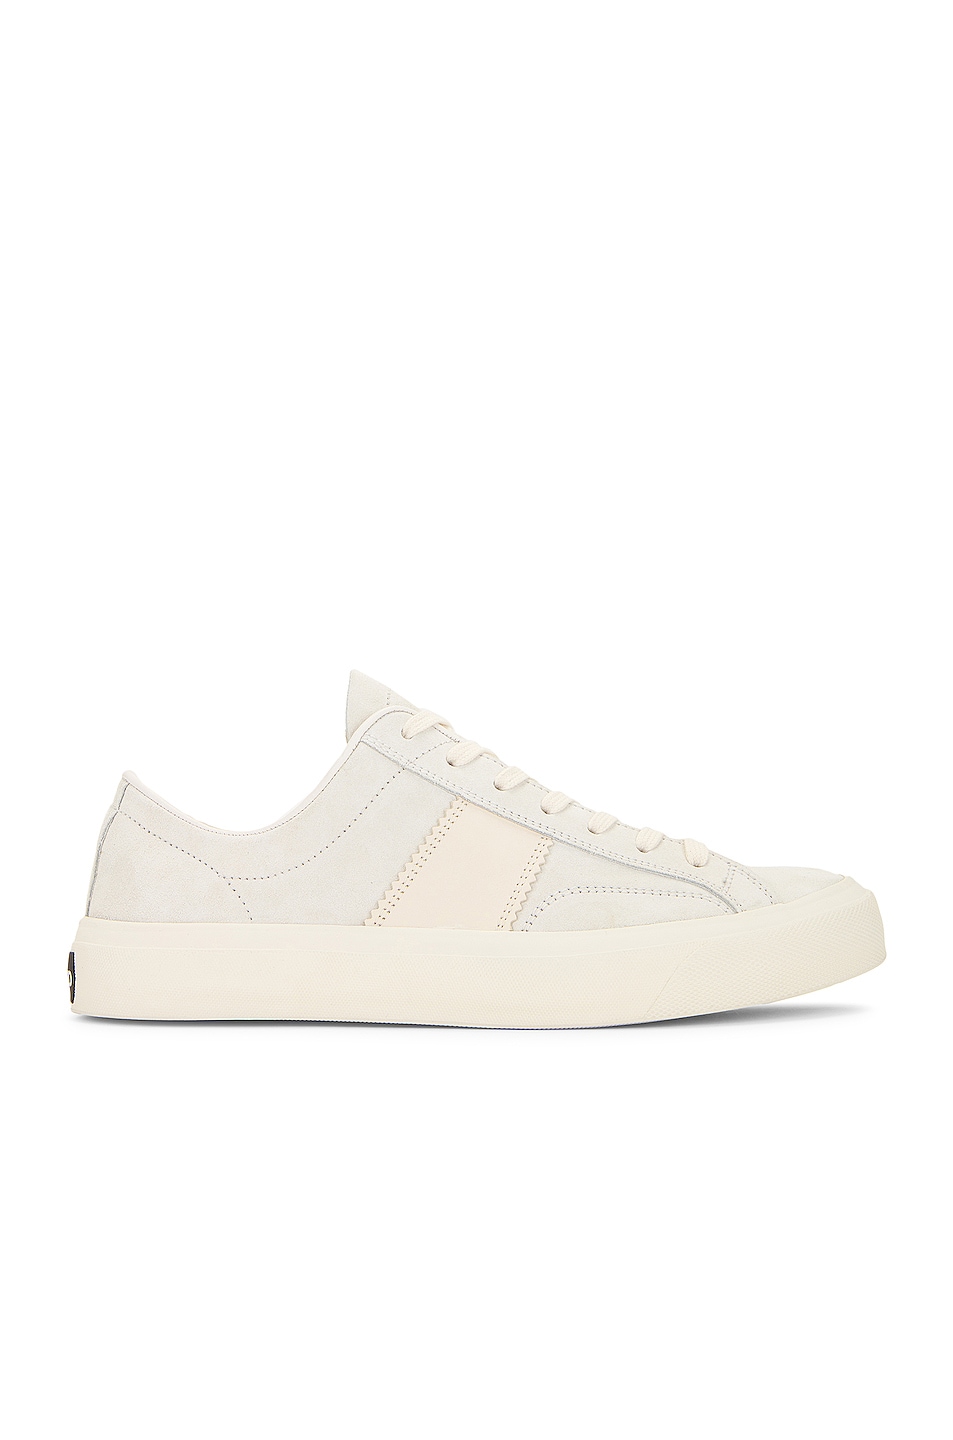 Image 1 of TOM FORD Suede Low Top Sneaker in White, Beige & Ivory